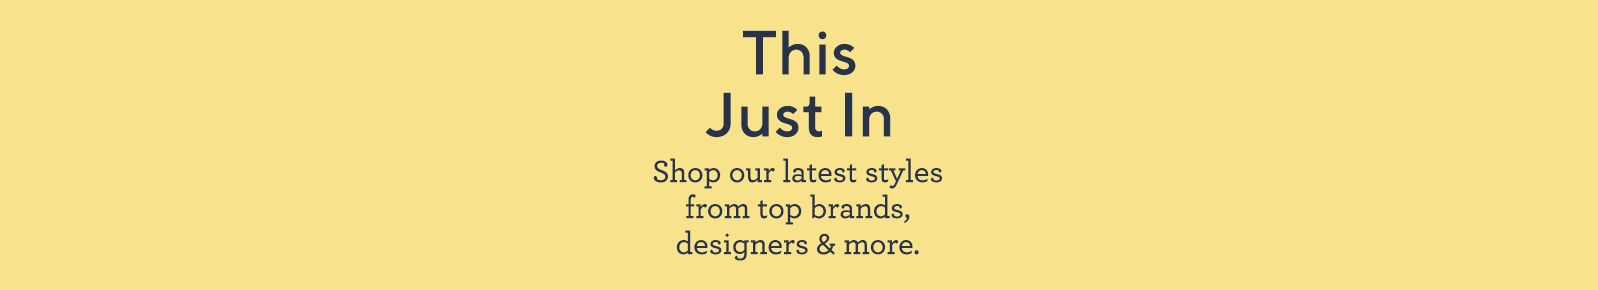 This Just In.  Shop our latest styles from top brands, designers & more